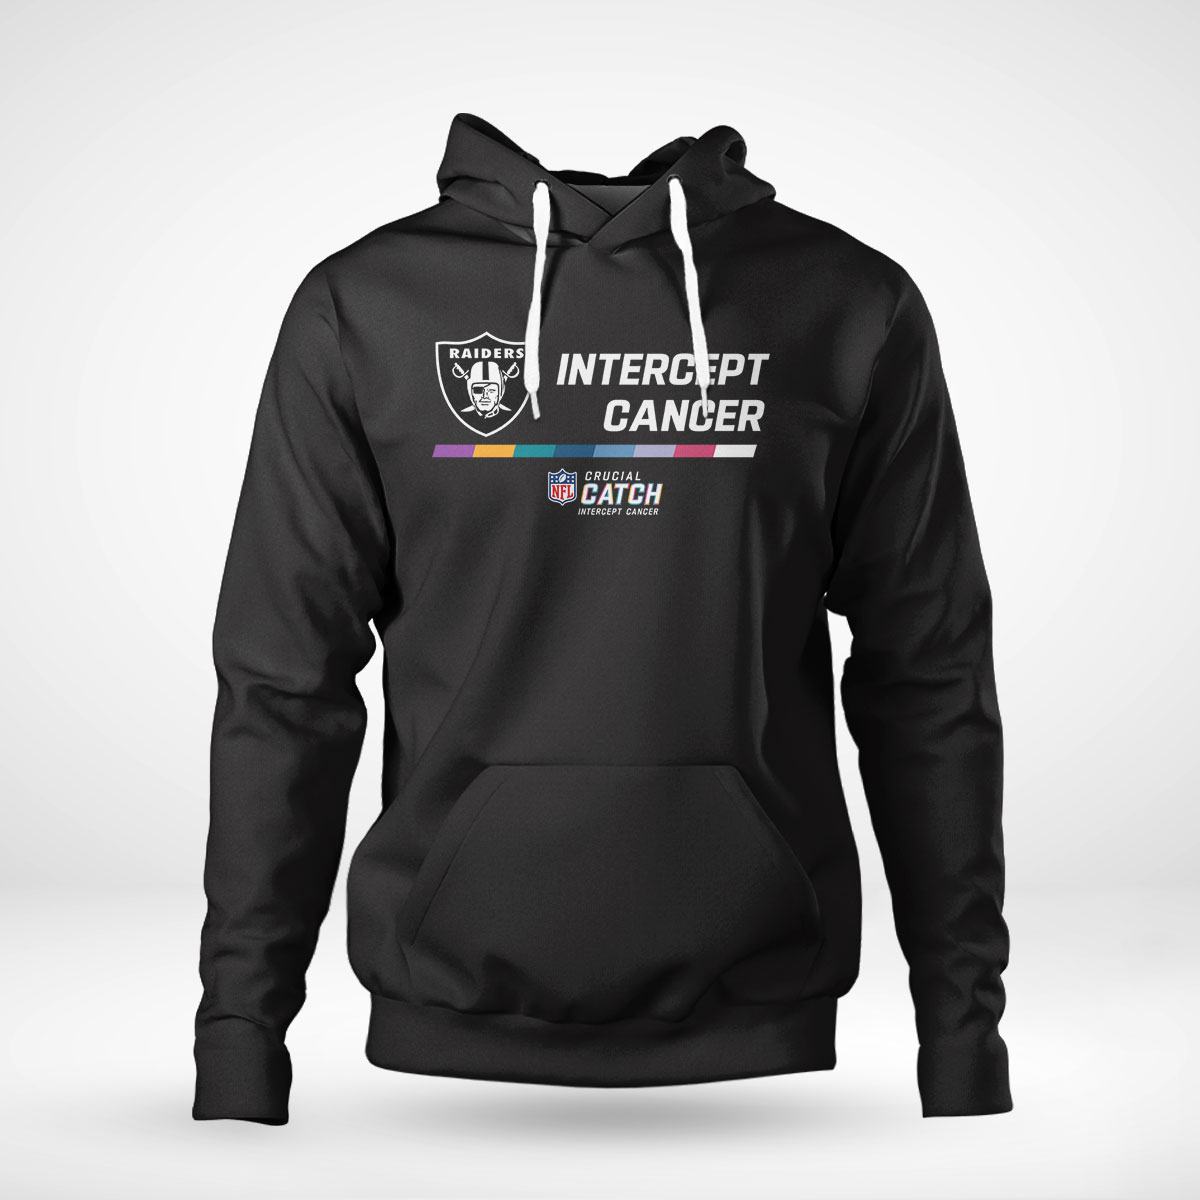 Las Vegas Raiders 2022 Nfl Intercept Cancer Crucial Catch Therma Performance Pullover Hoodie T-shirt Long Sleeve, Tank Top